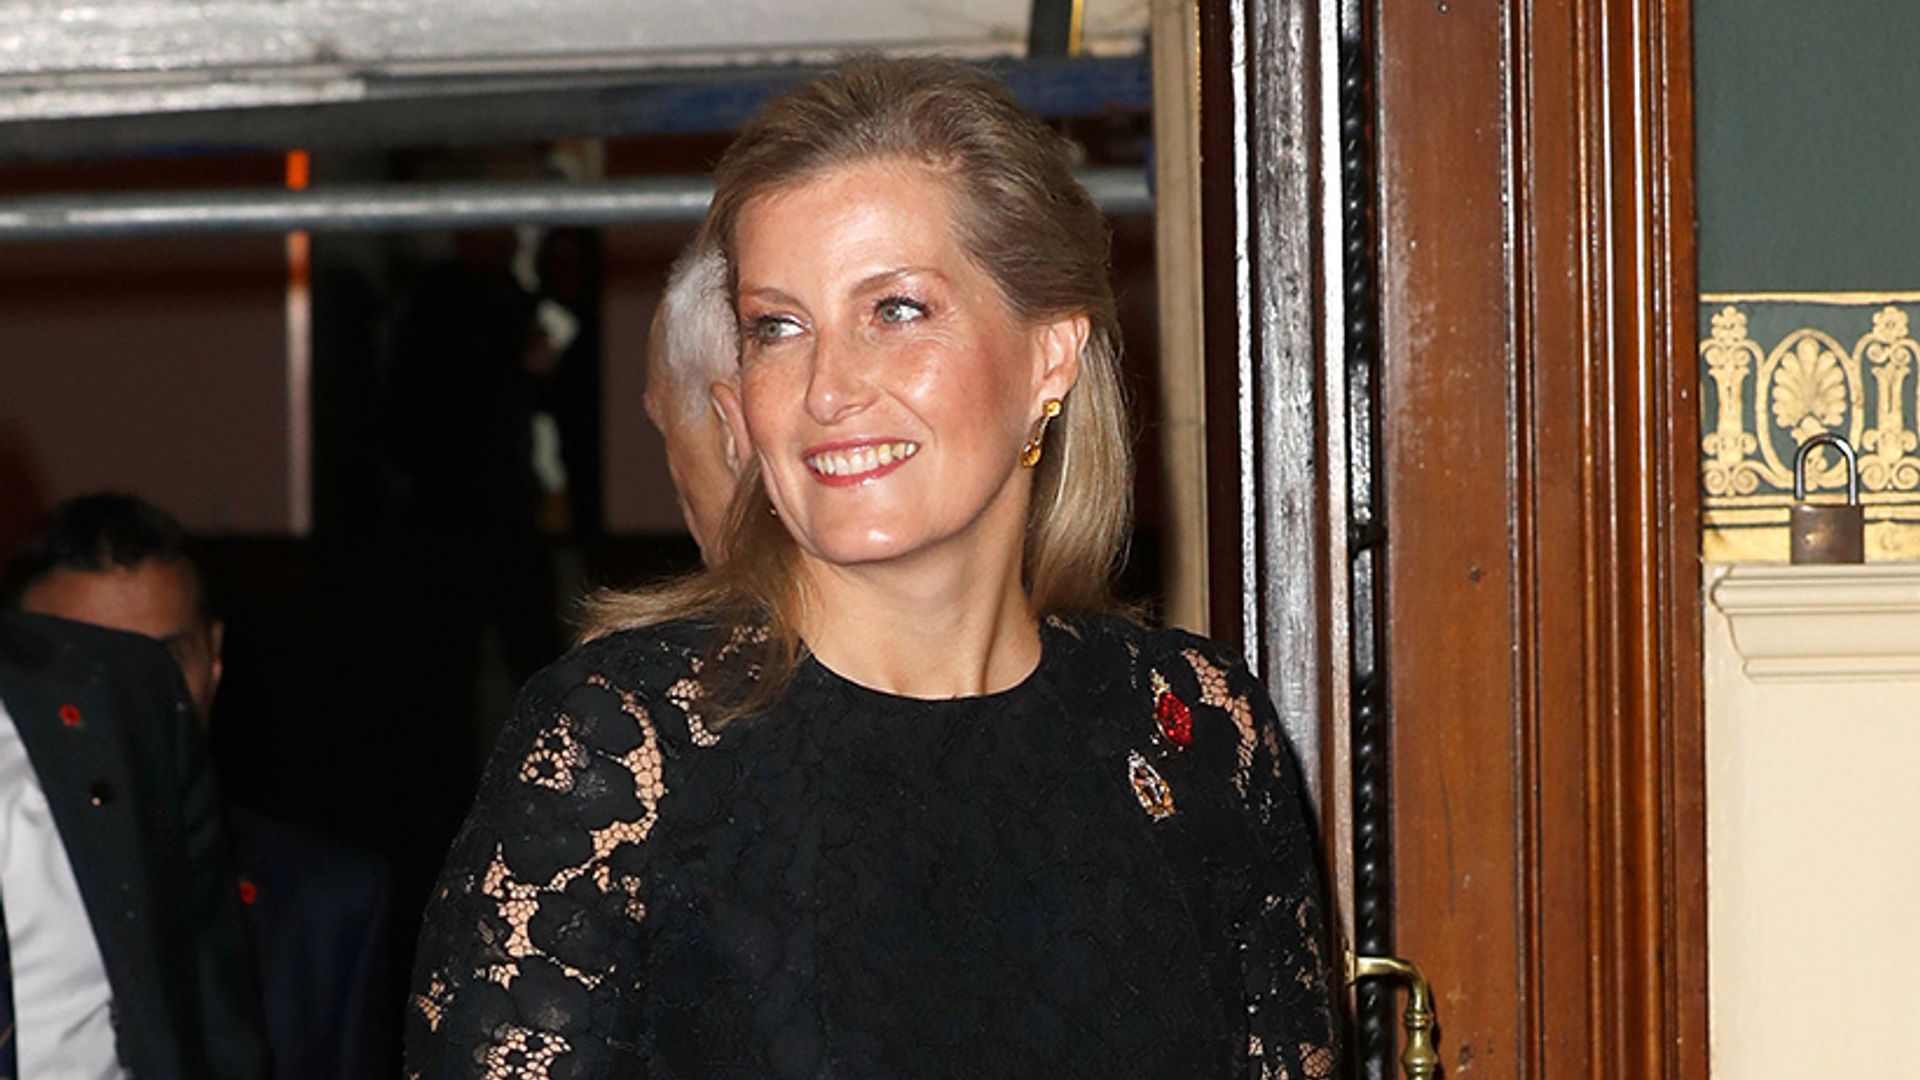 The Countess of Wessex is chic in black dress for the Royal Festival of Remembrance